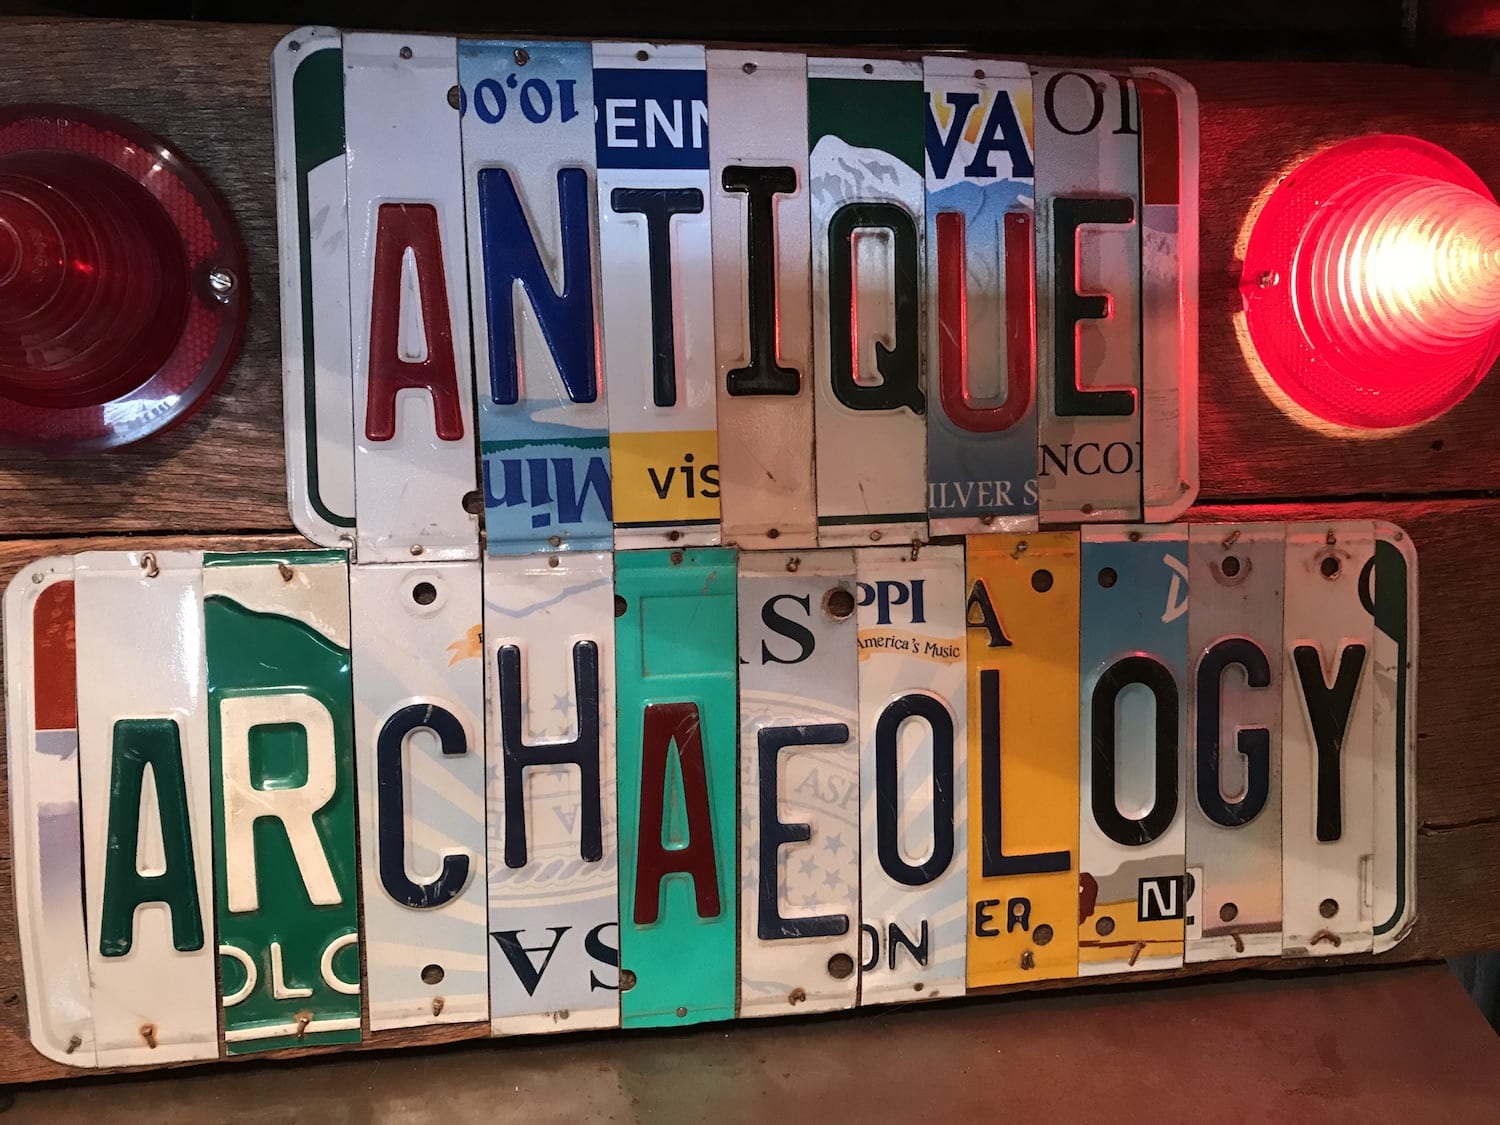 Antique Archaeology Home of American Pickers' Mike Wolfe